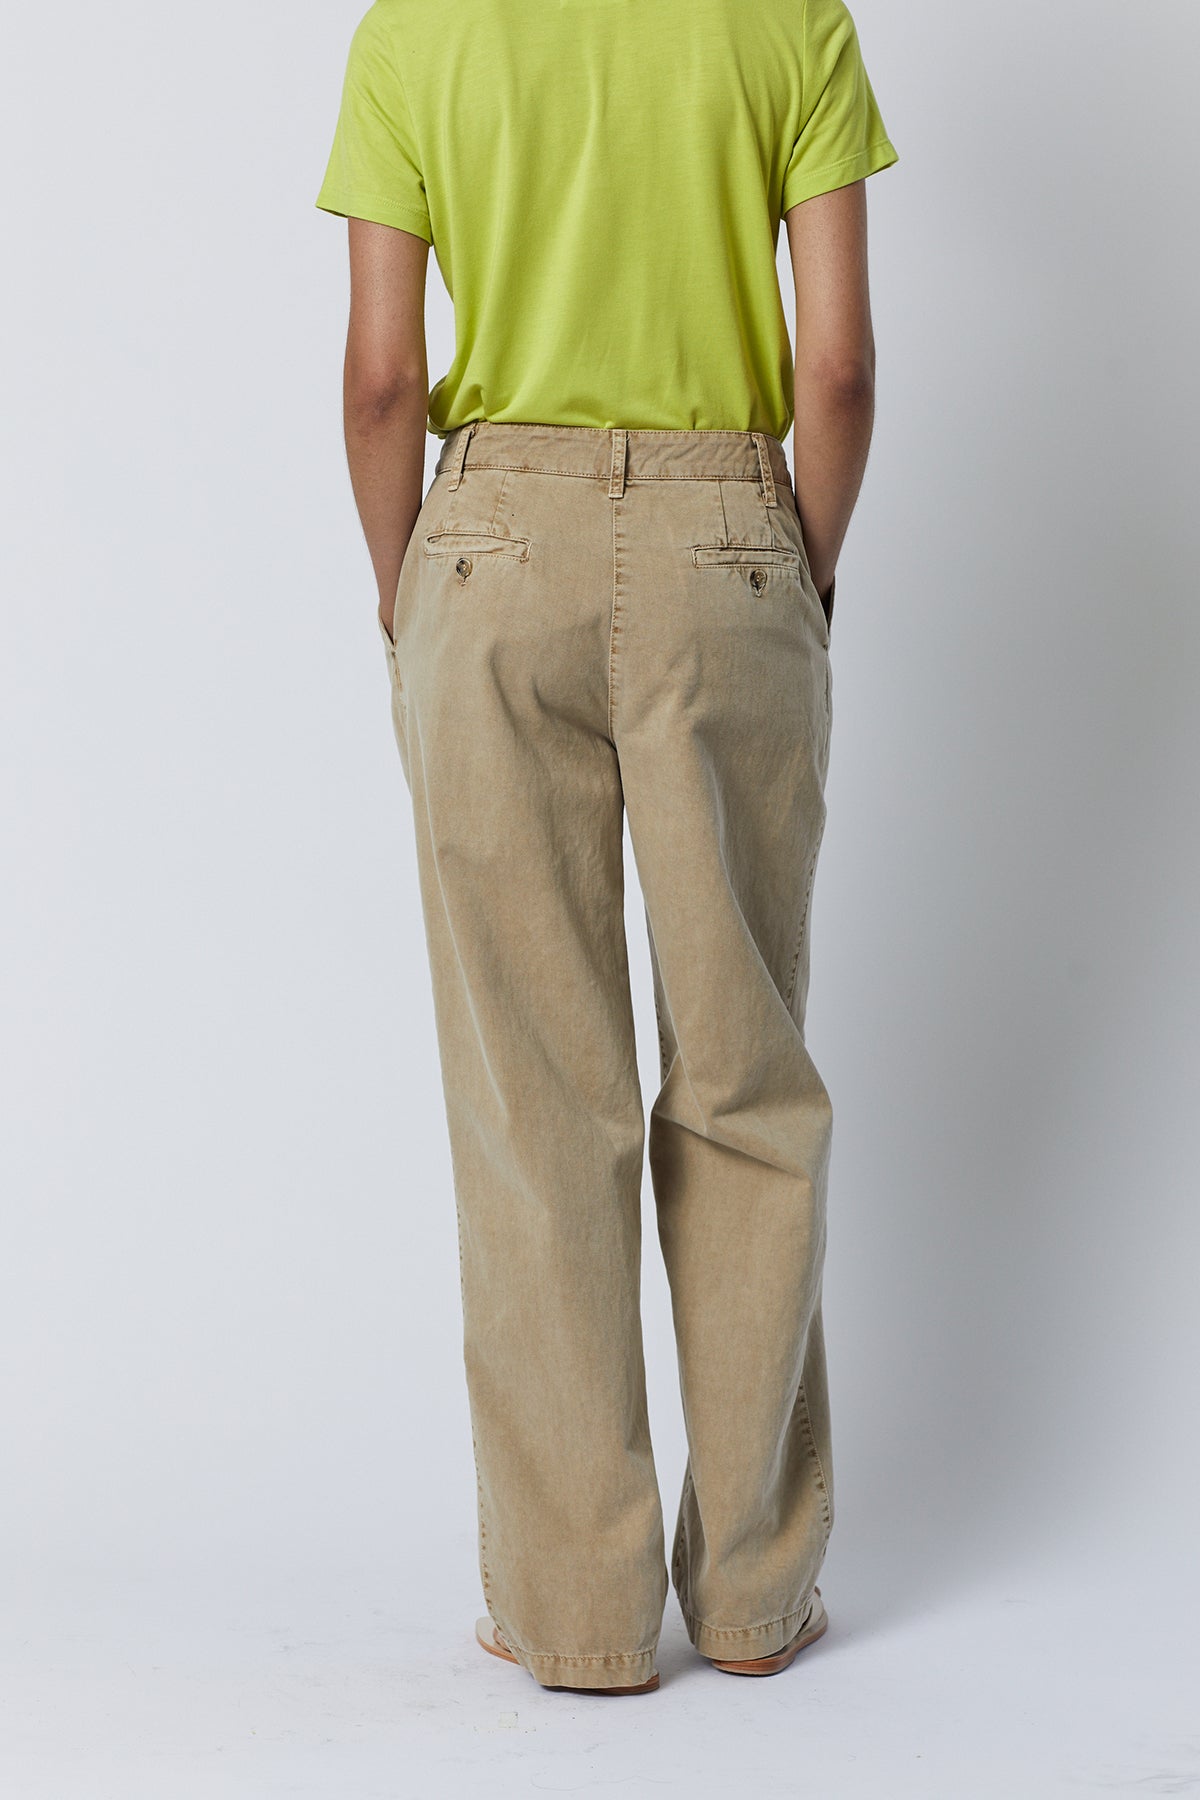 Temescal Pant in putty back-26007130603713